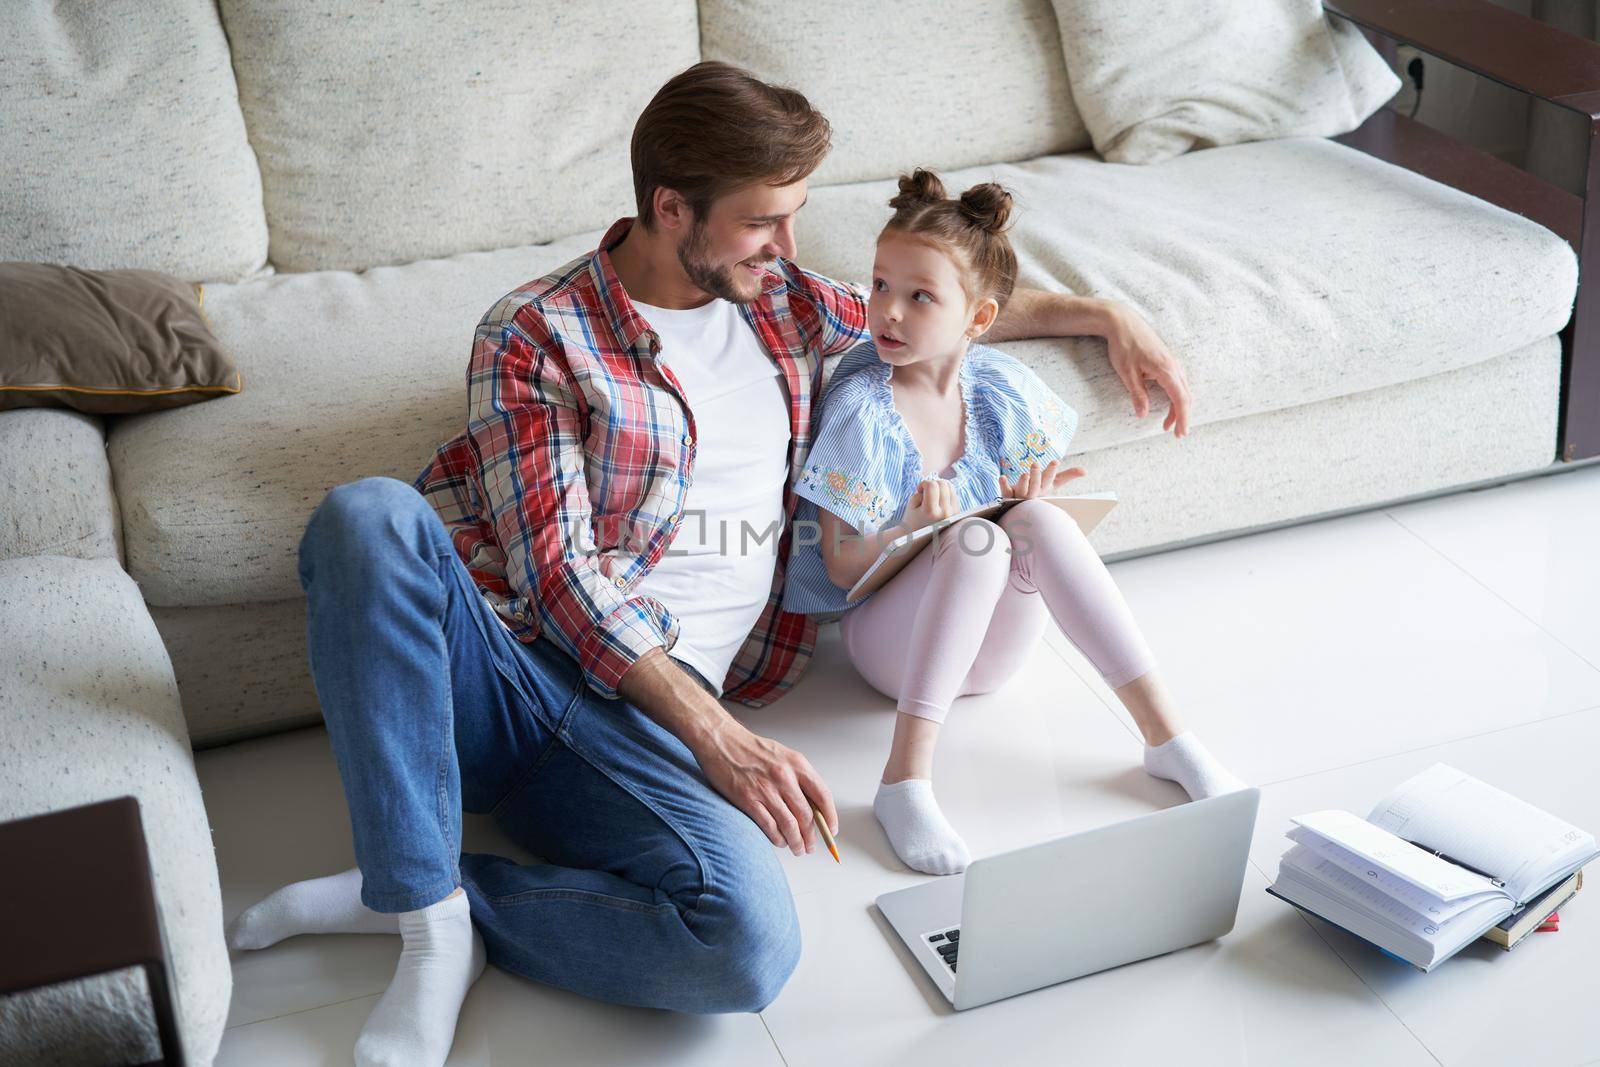 Smiling father and daughter sitting on floor in living room with laptop, teaching lessons. by tsyhun